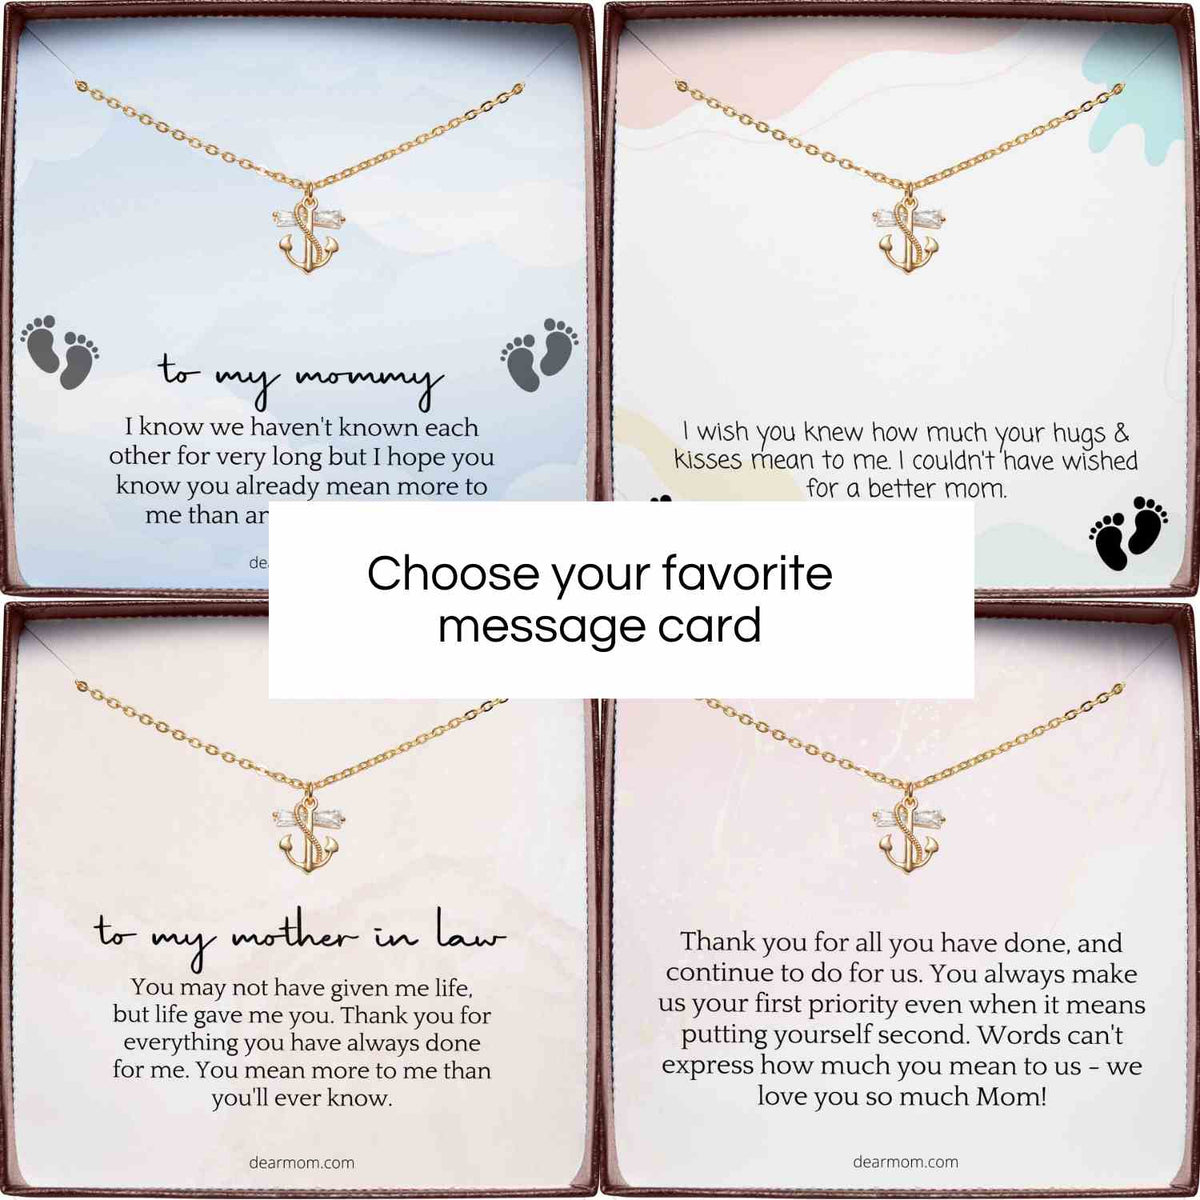 Anchor Necklace | Gift for Mom